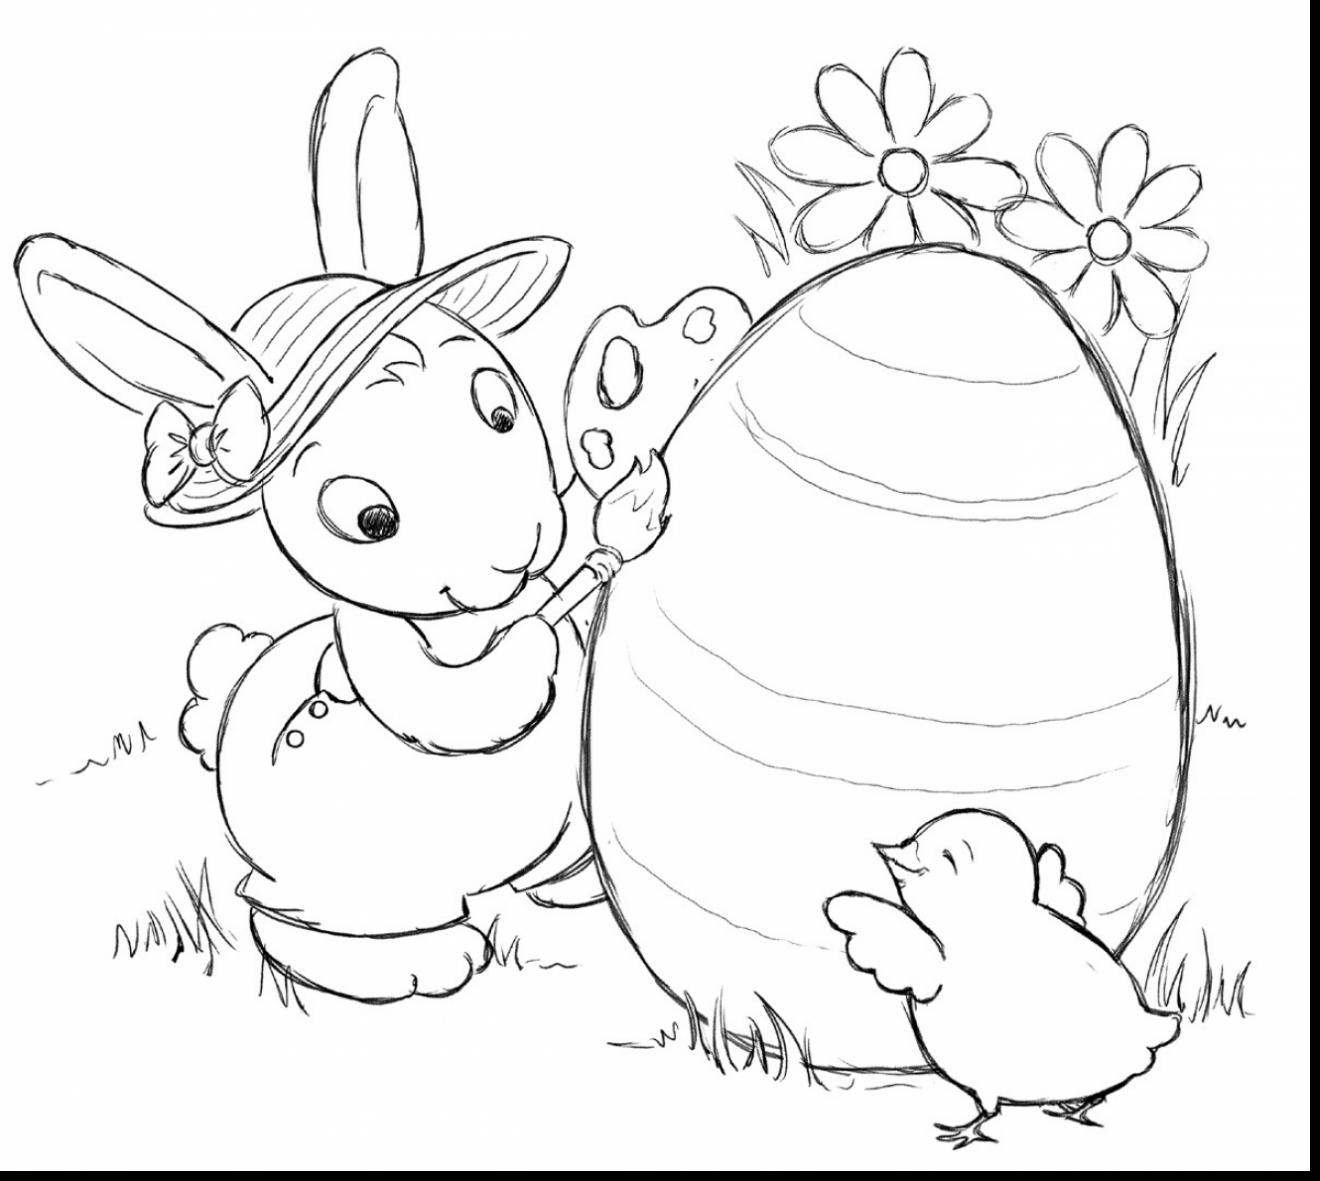 Crayola Easter Coloring Pages at GetColorings.com | Free printable